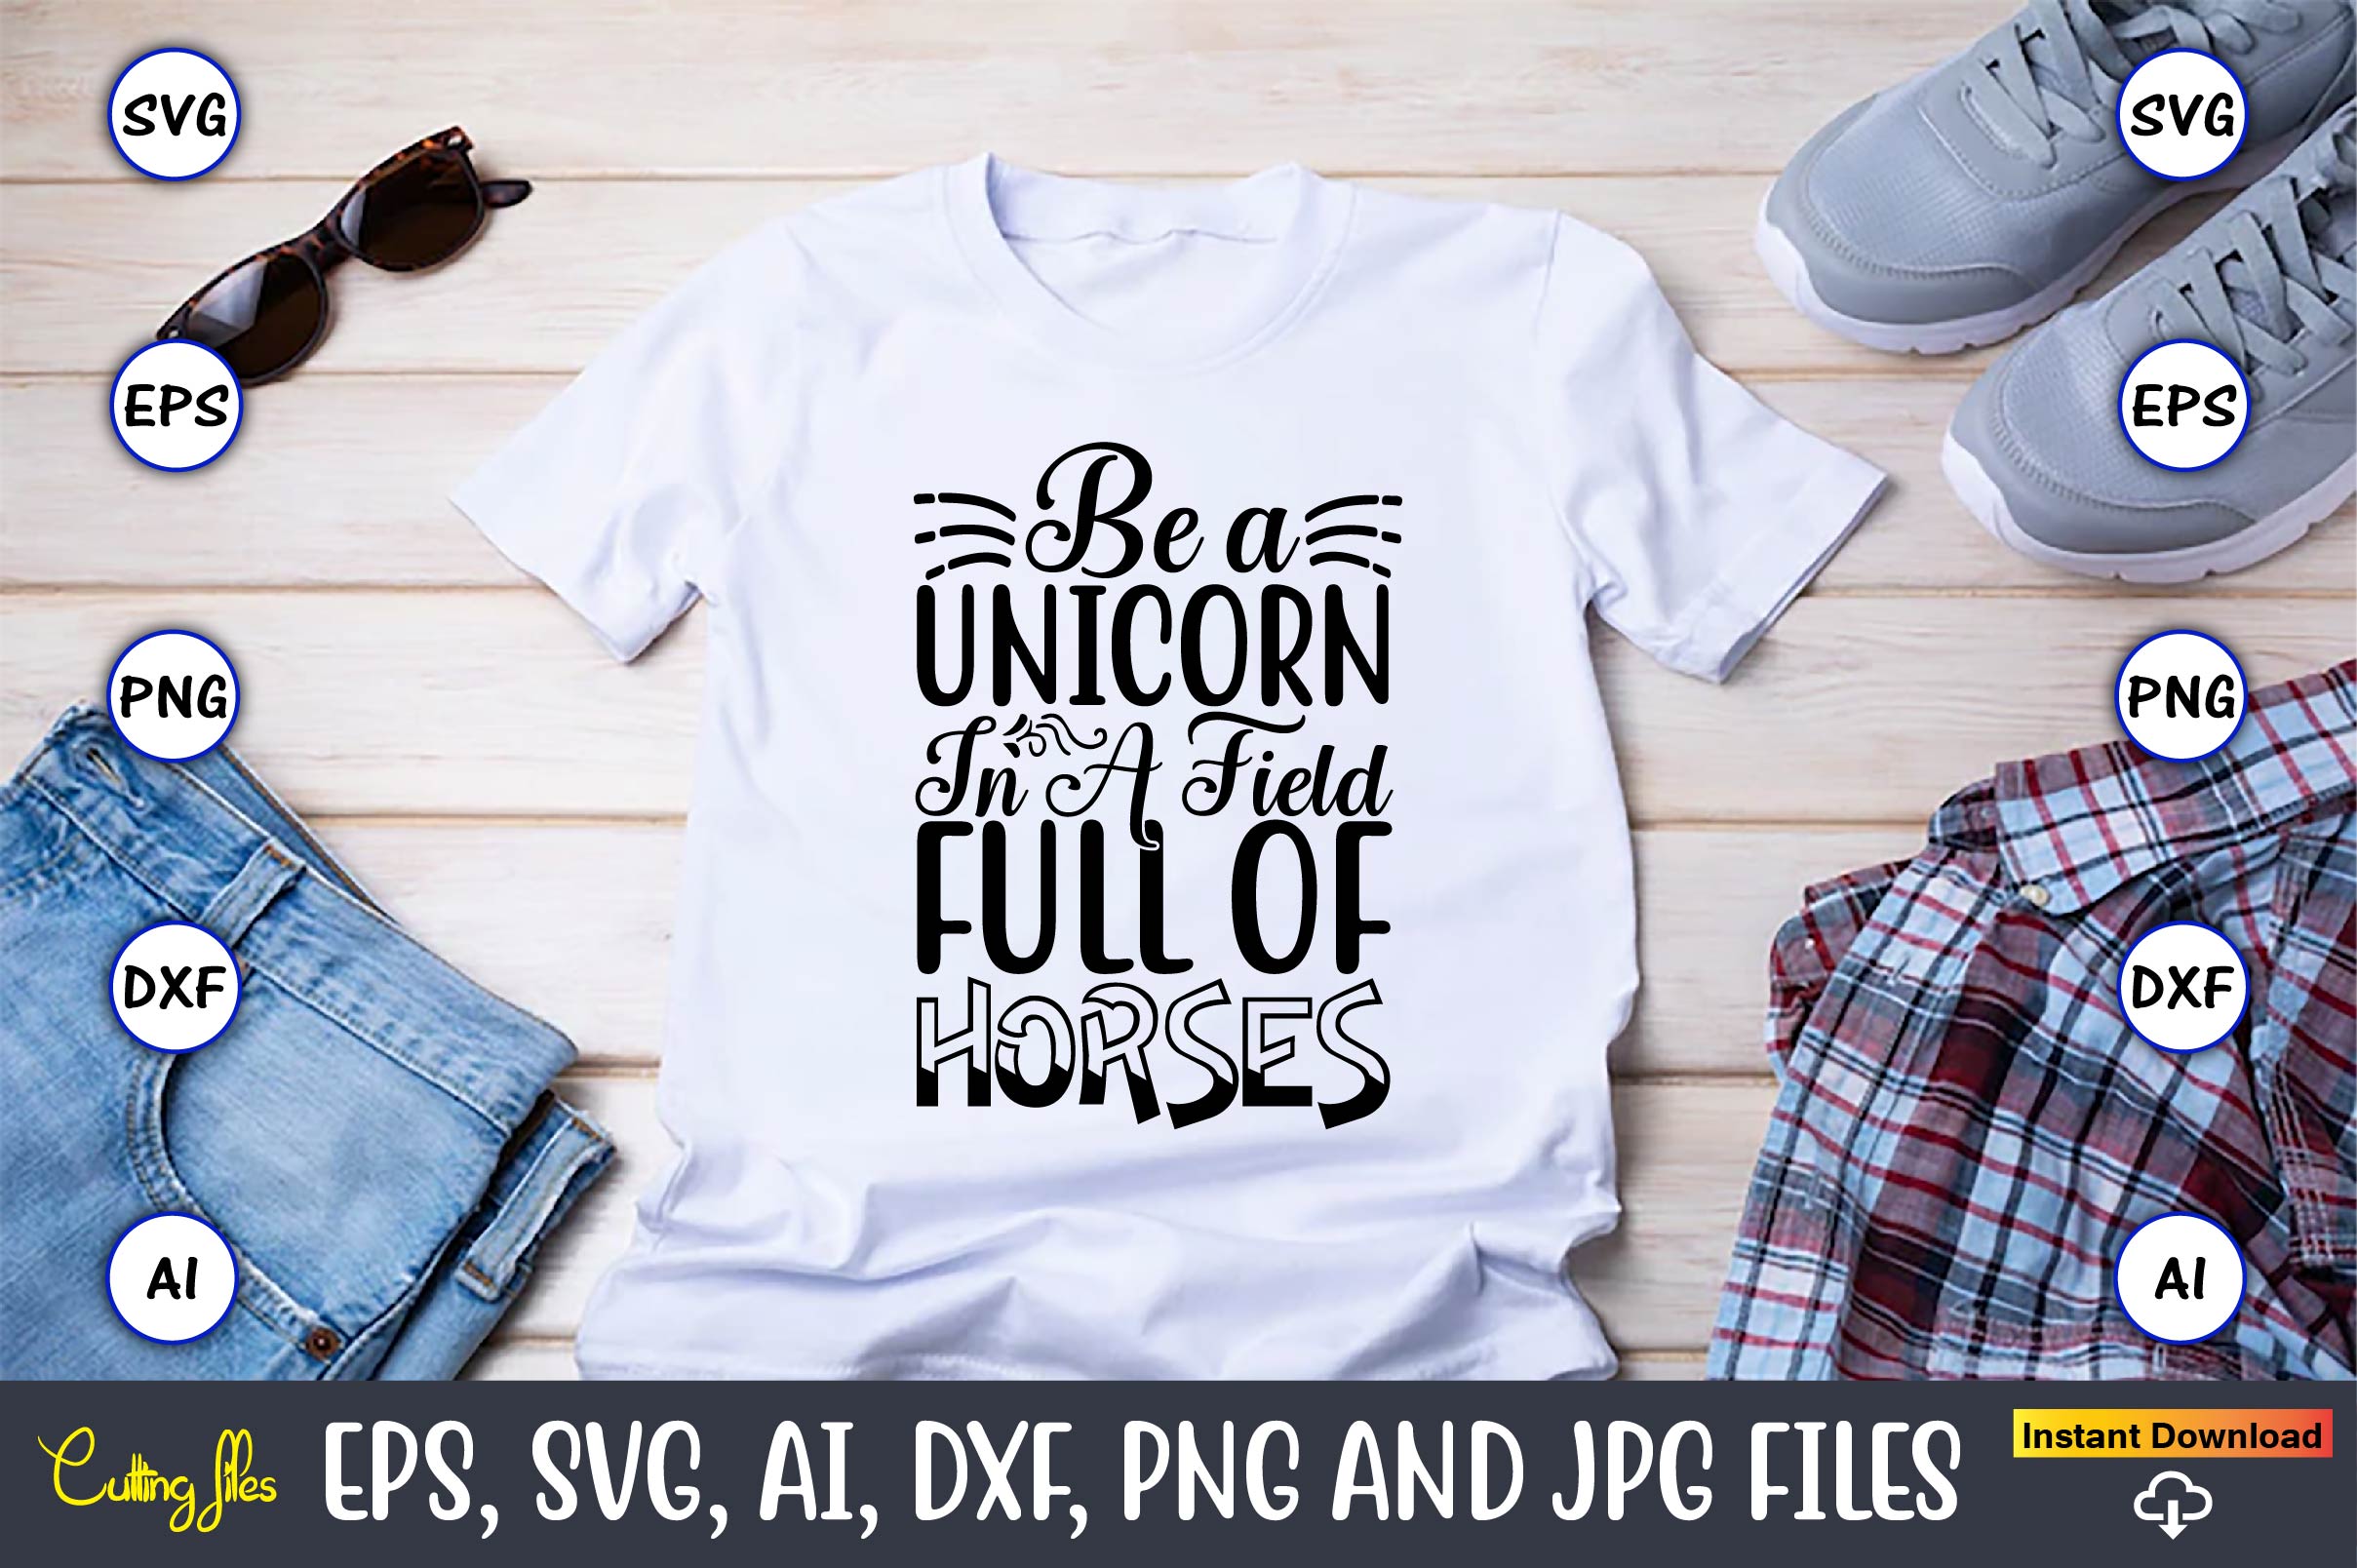 Image of a white t-shirt with an amazing inscription Be a unicorn in a field full of horses.